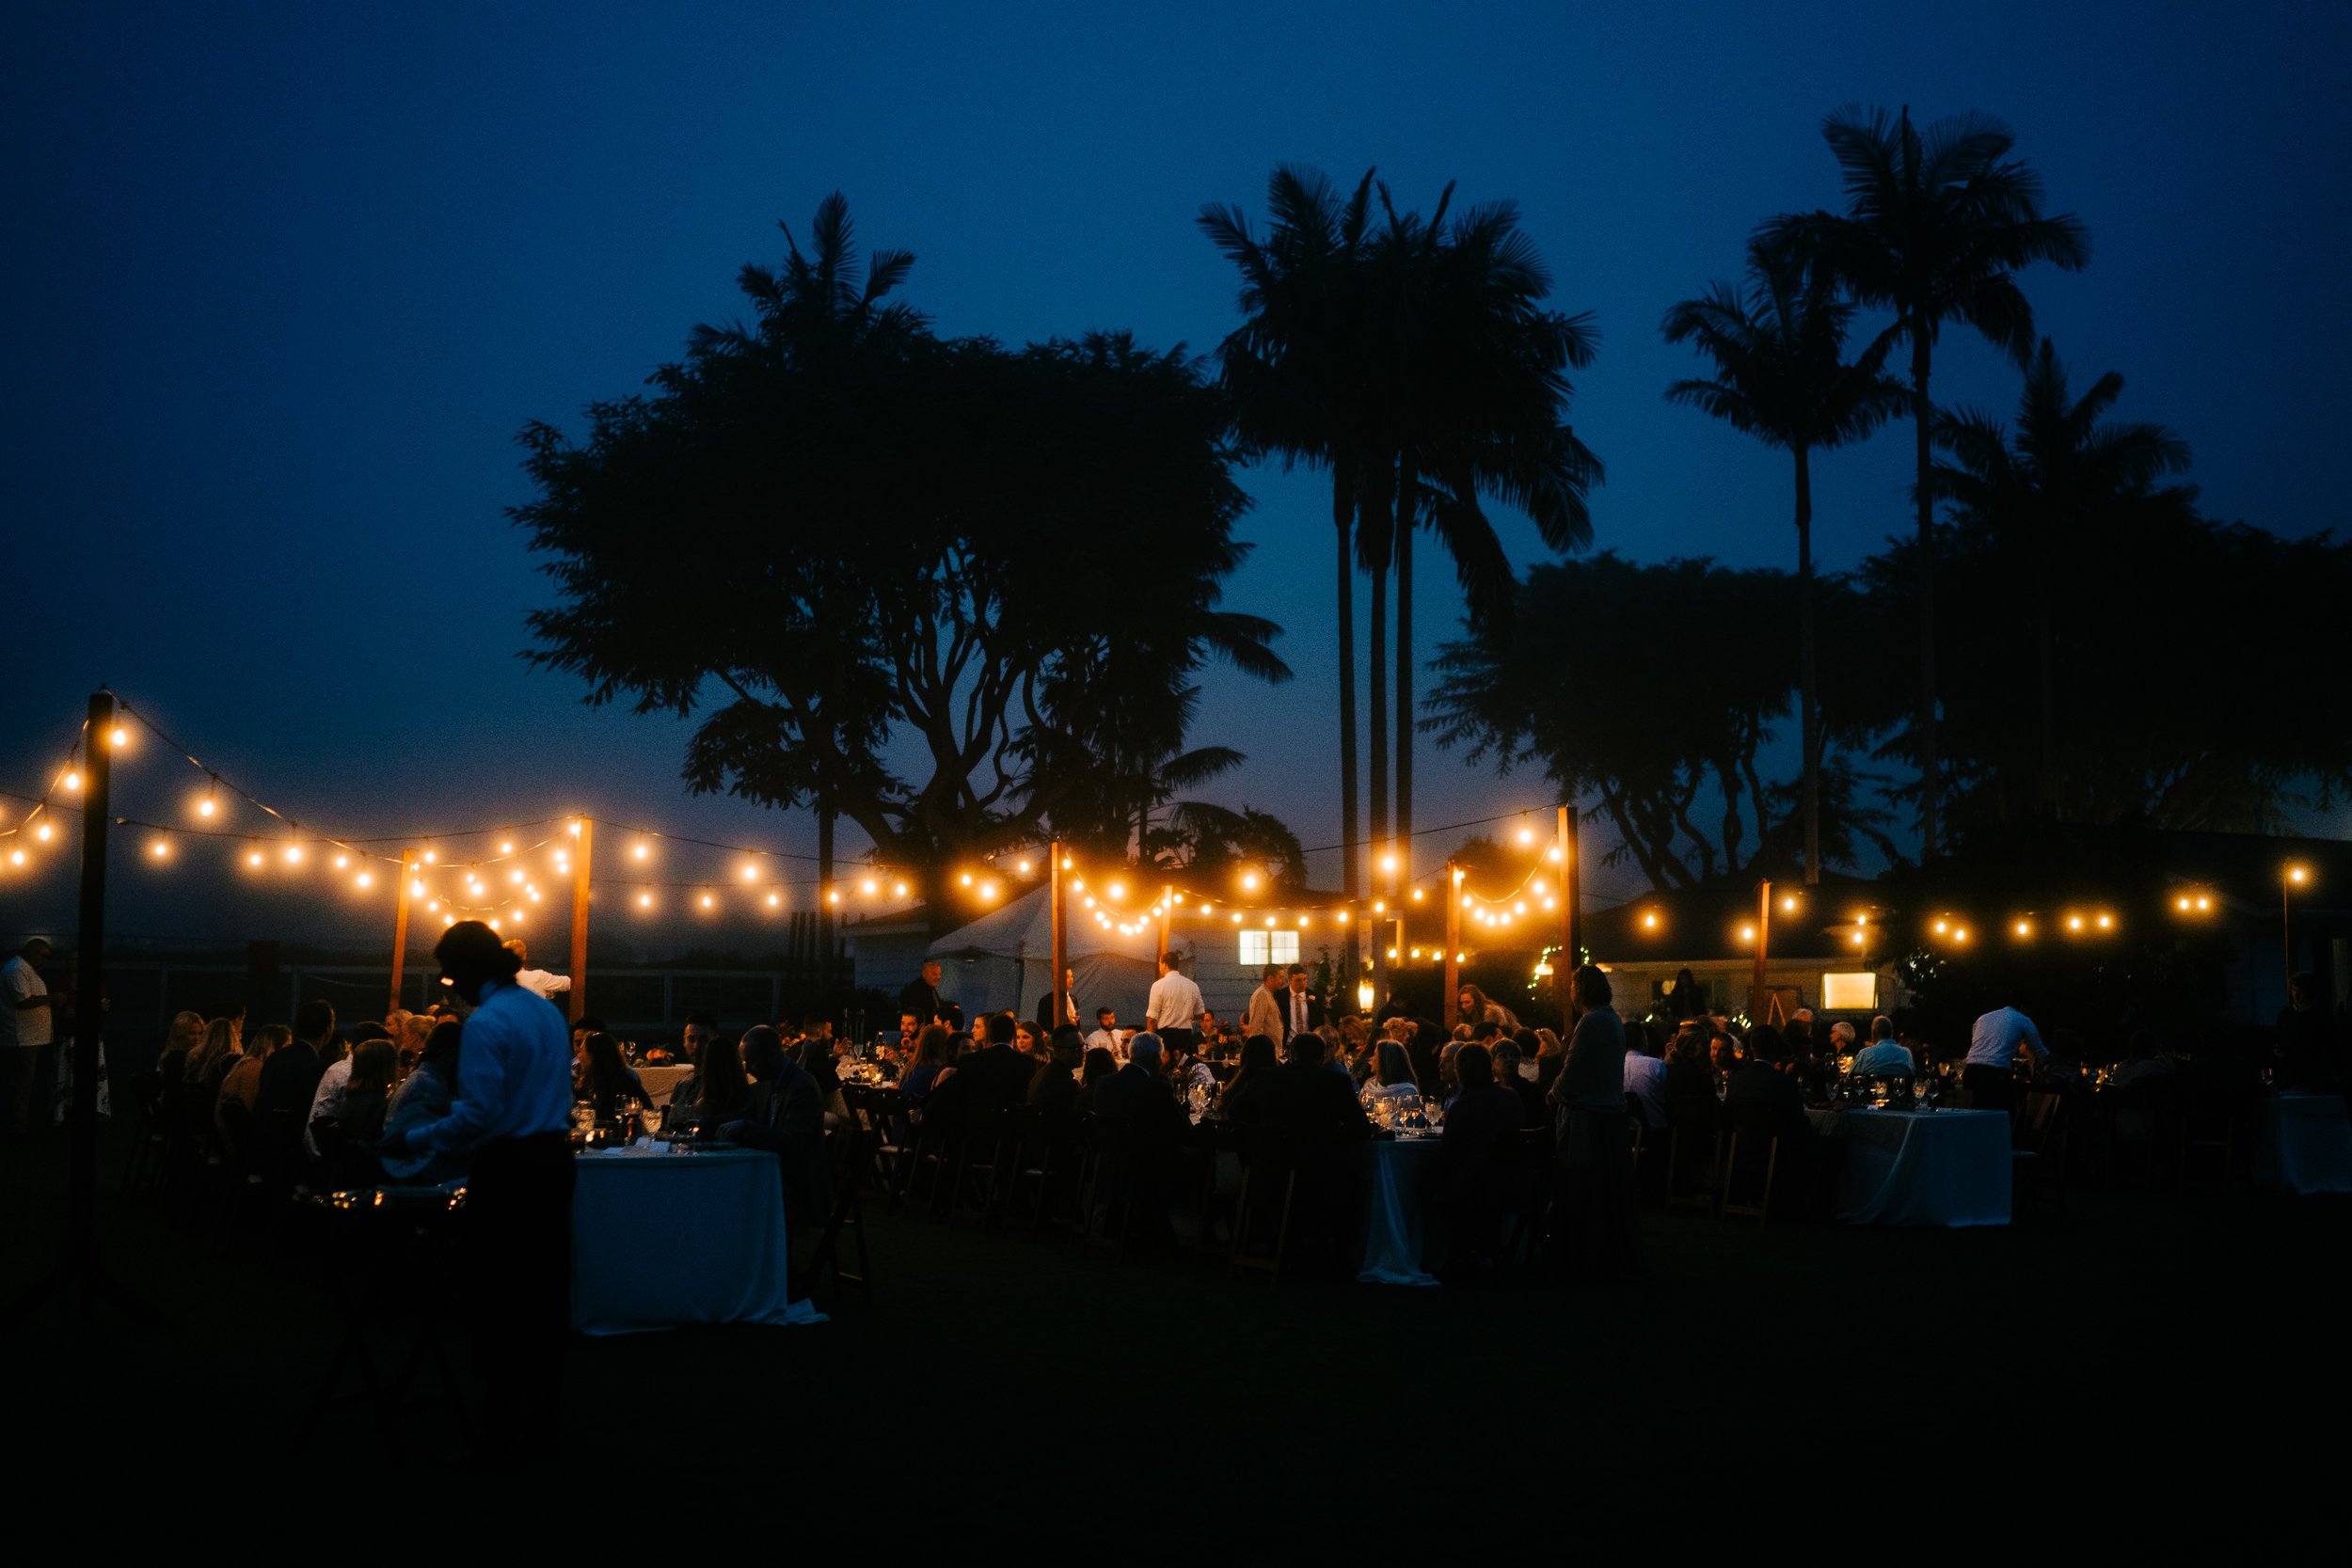 www.santabarbarawedding.com | Brandon Bibbins Photography | The Cottages at Polo Run | Bright Event Rentals | Lighted Reception at Night